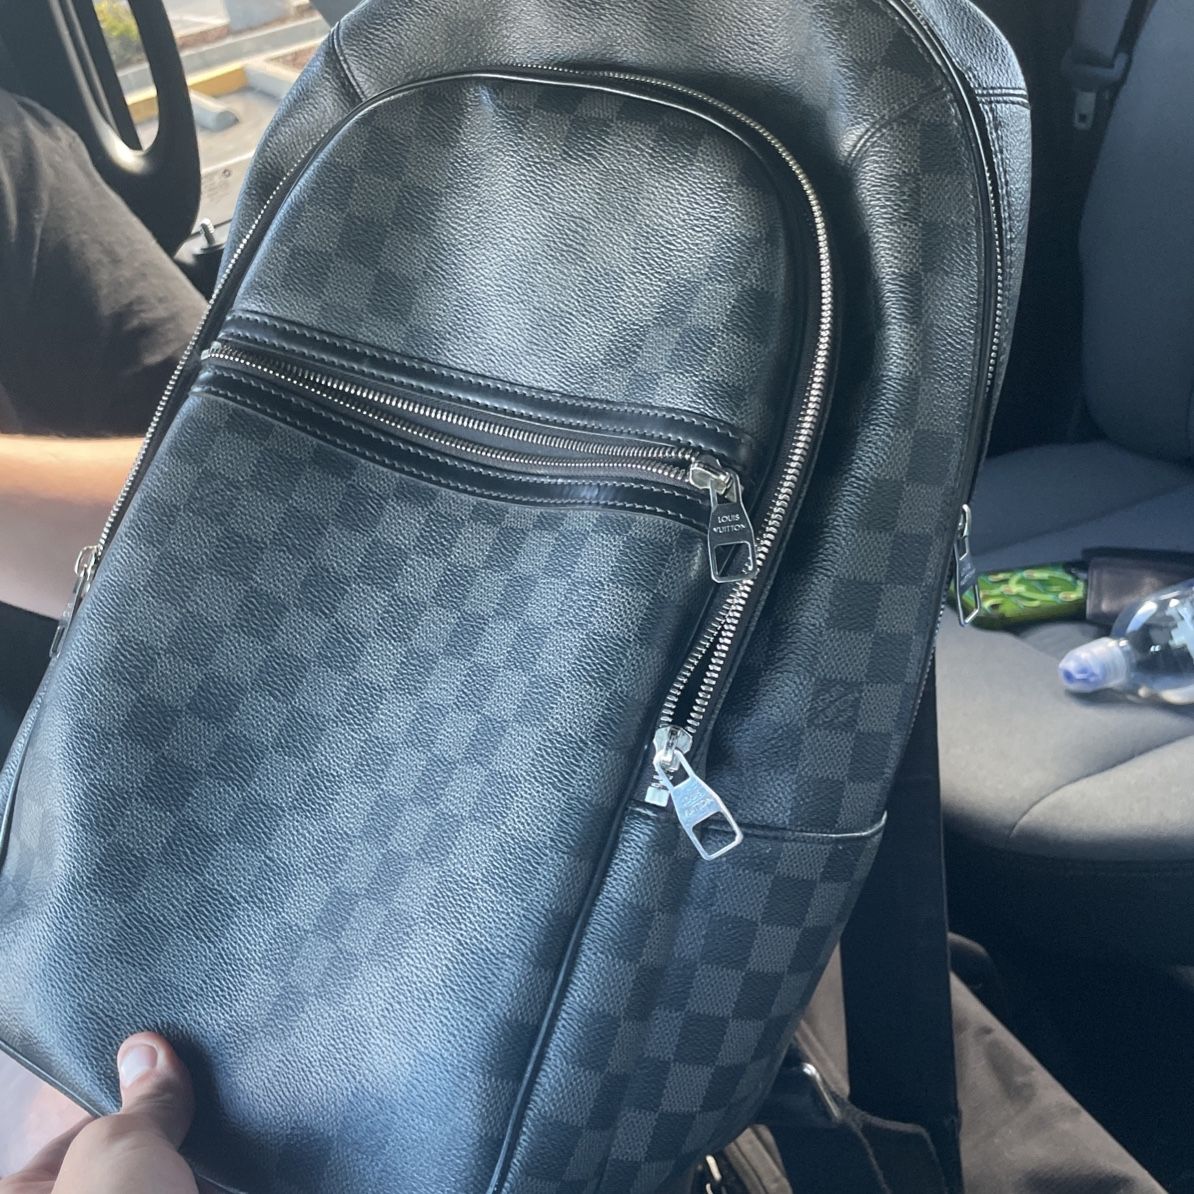 Louis Vuitton Michael Backpack in Graphite for Sale in Inglewood